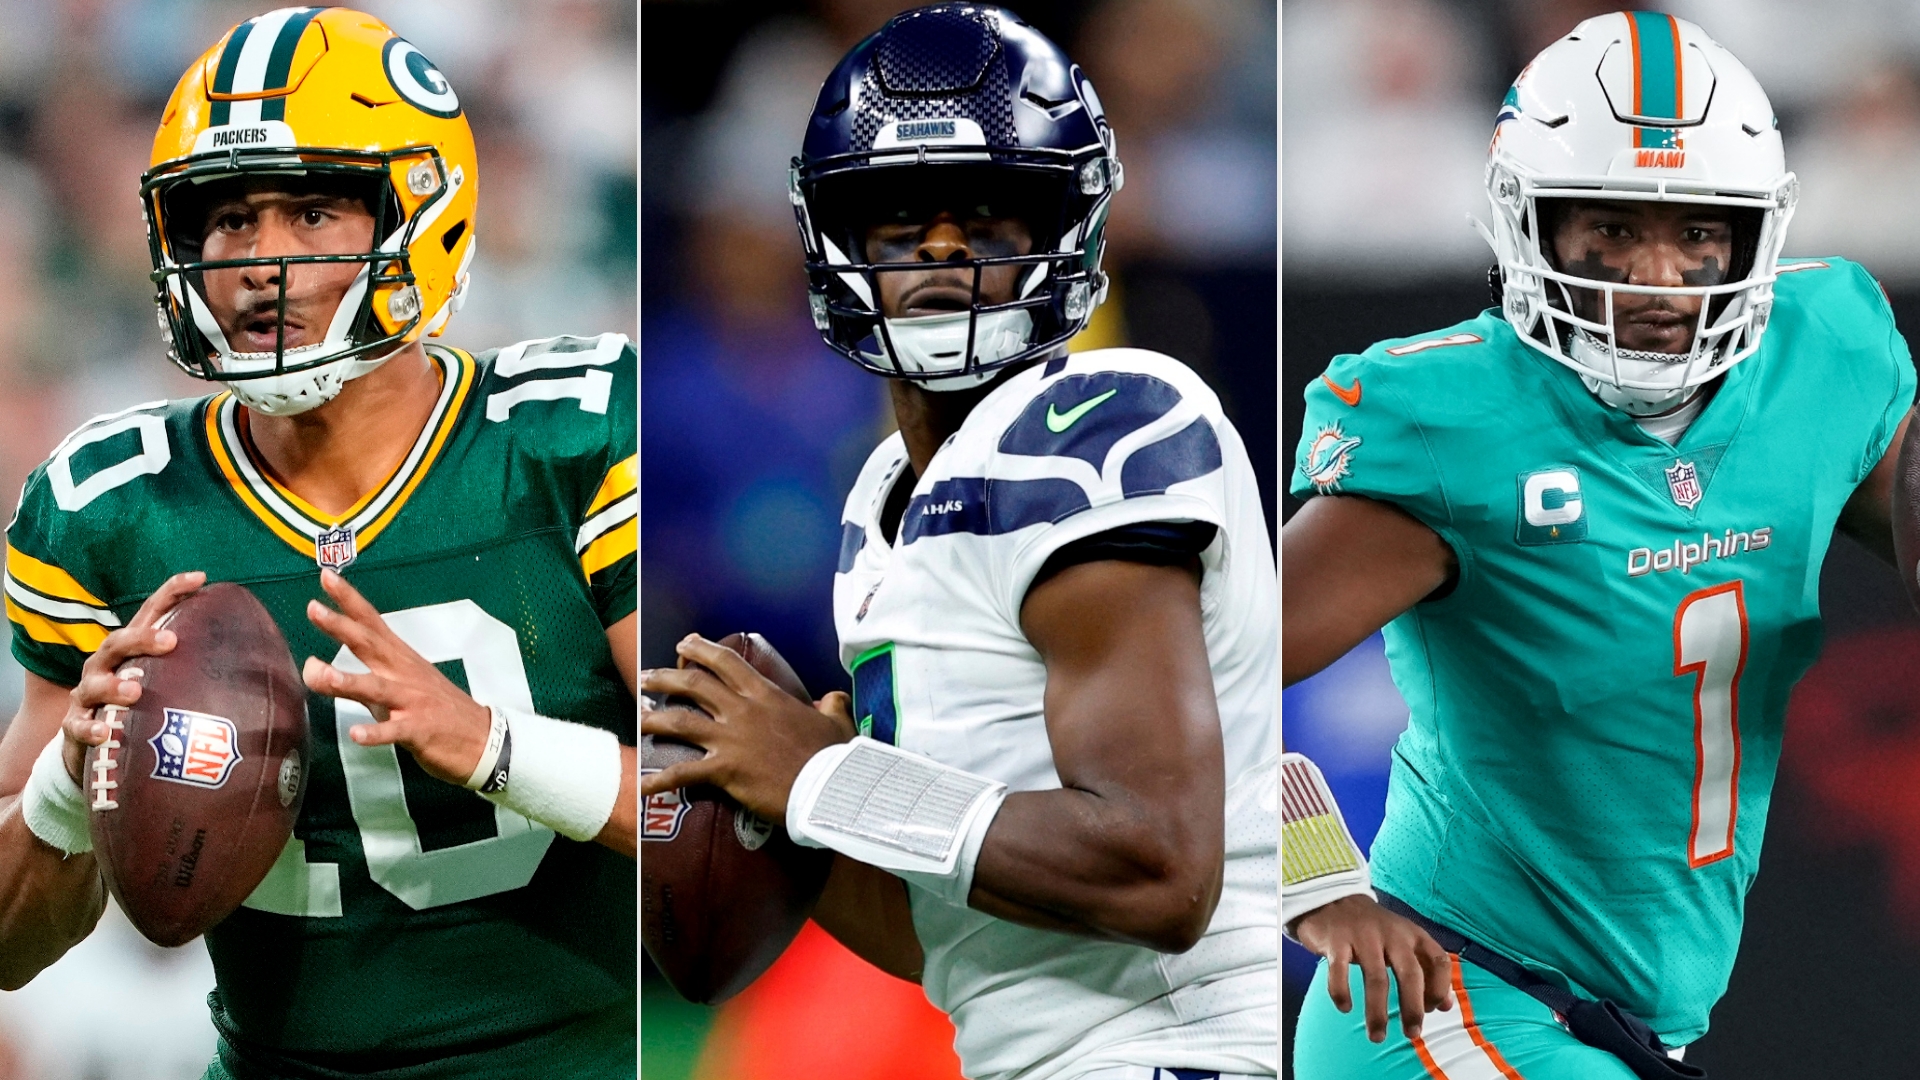 nfl odds, lines, point spreads: updated week 3 betting information for picking every game